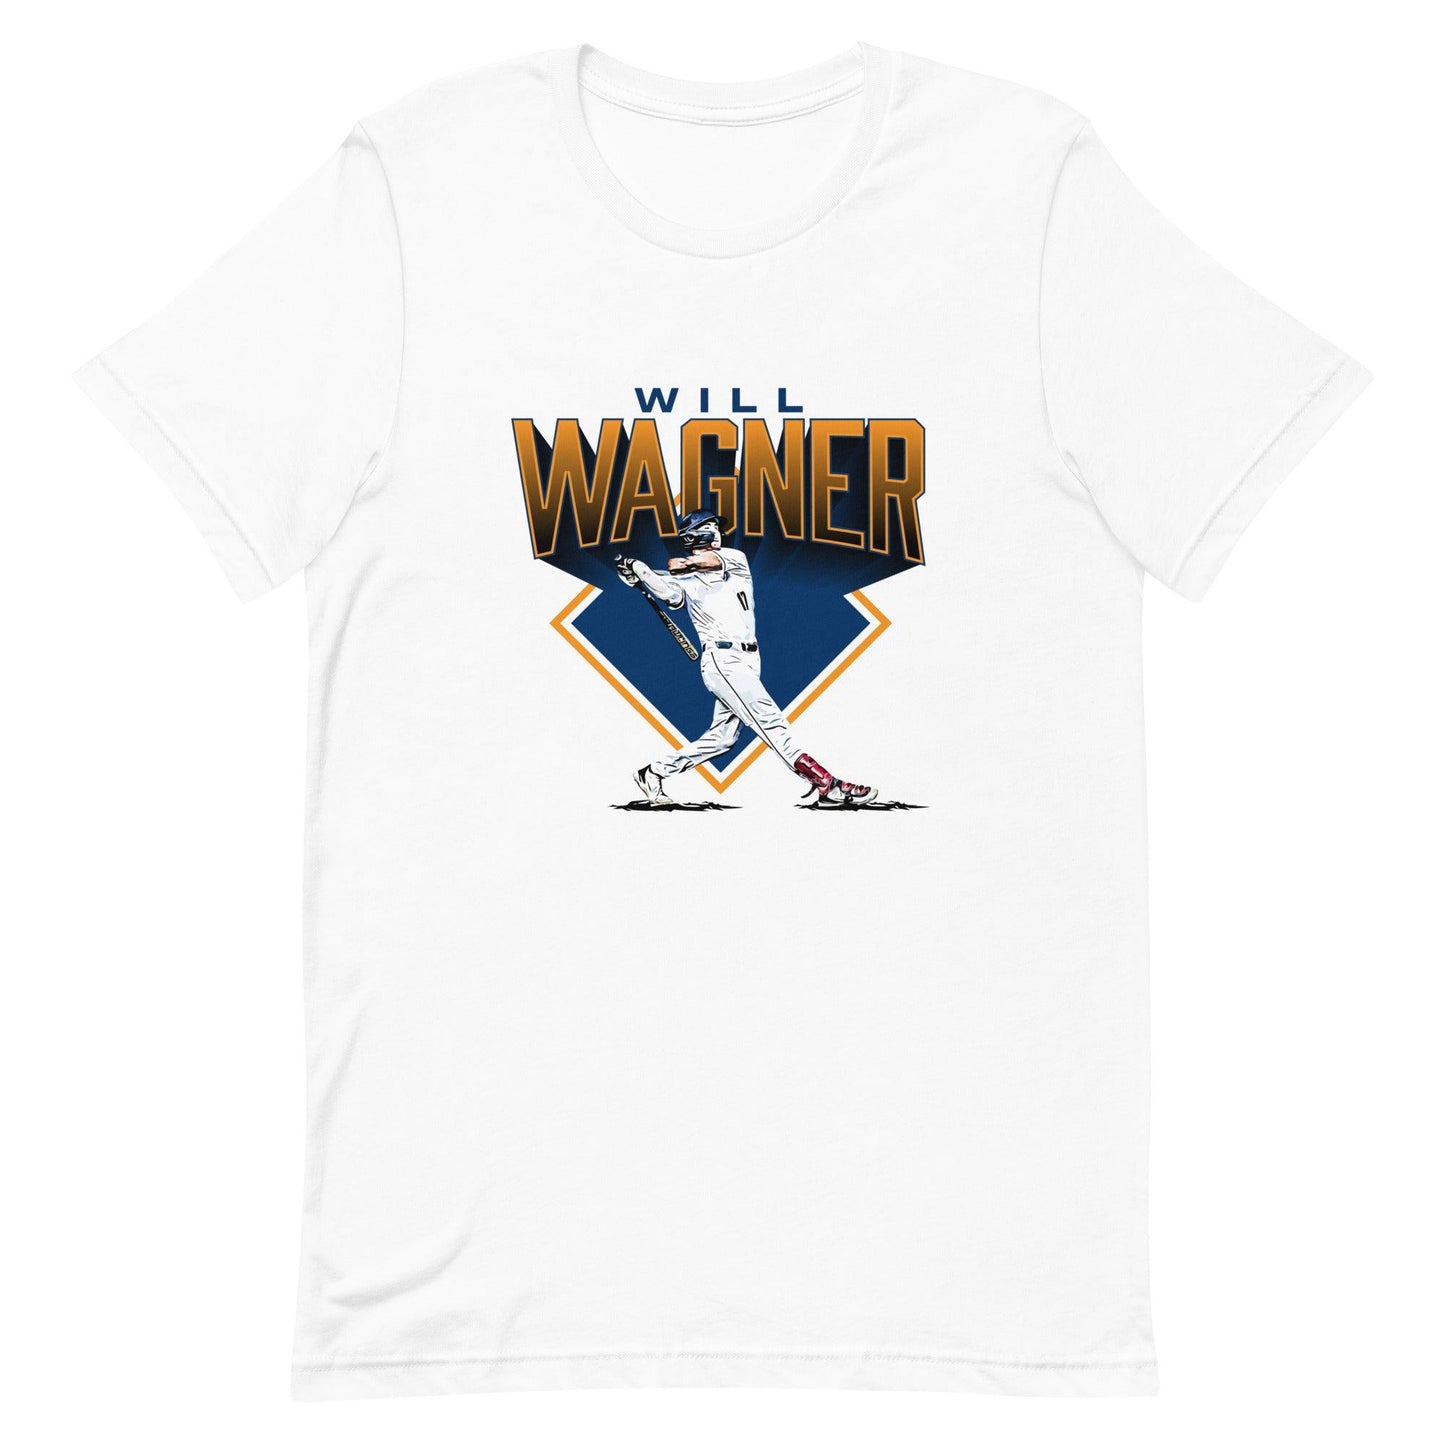 Will Wagner "Essential" t-shirt - Fan Arch